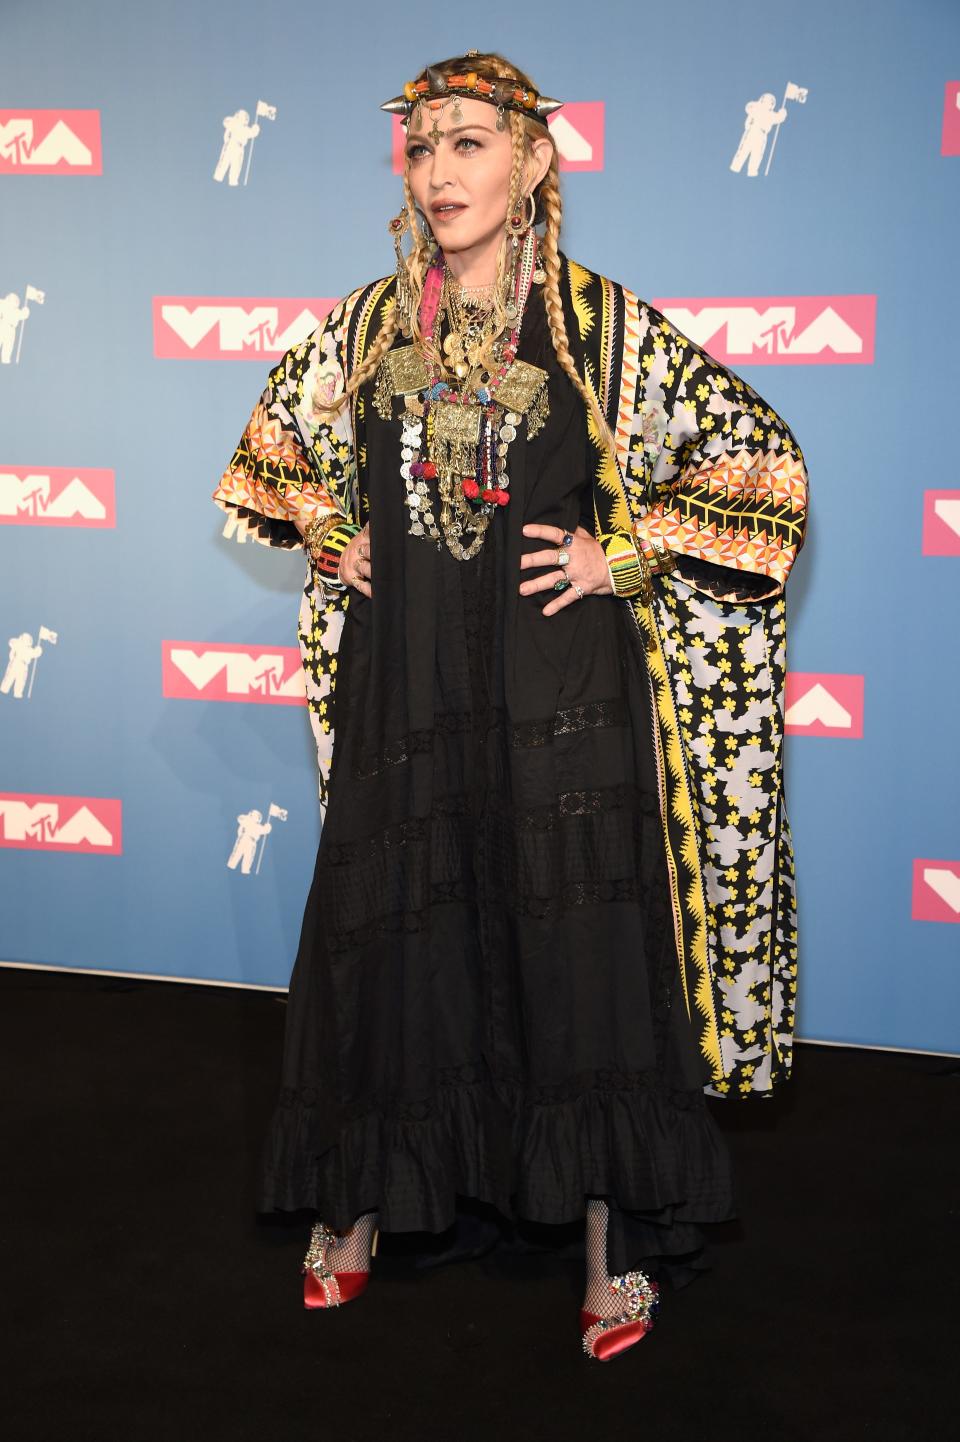 Madonna poses backstage during the 2018 MTV Video Music Awards.